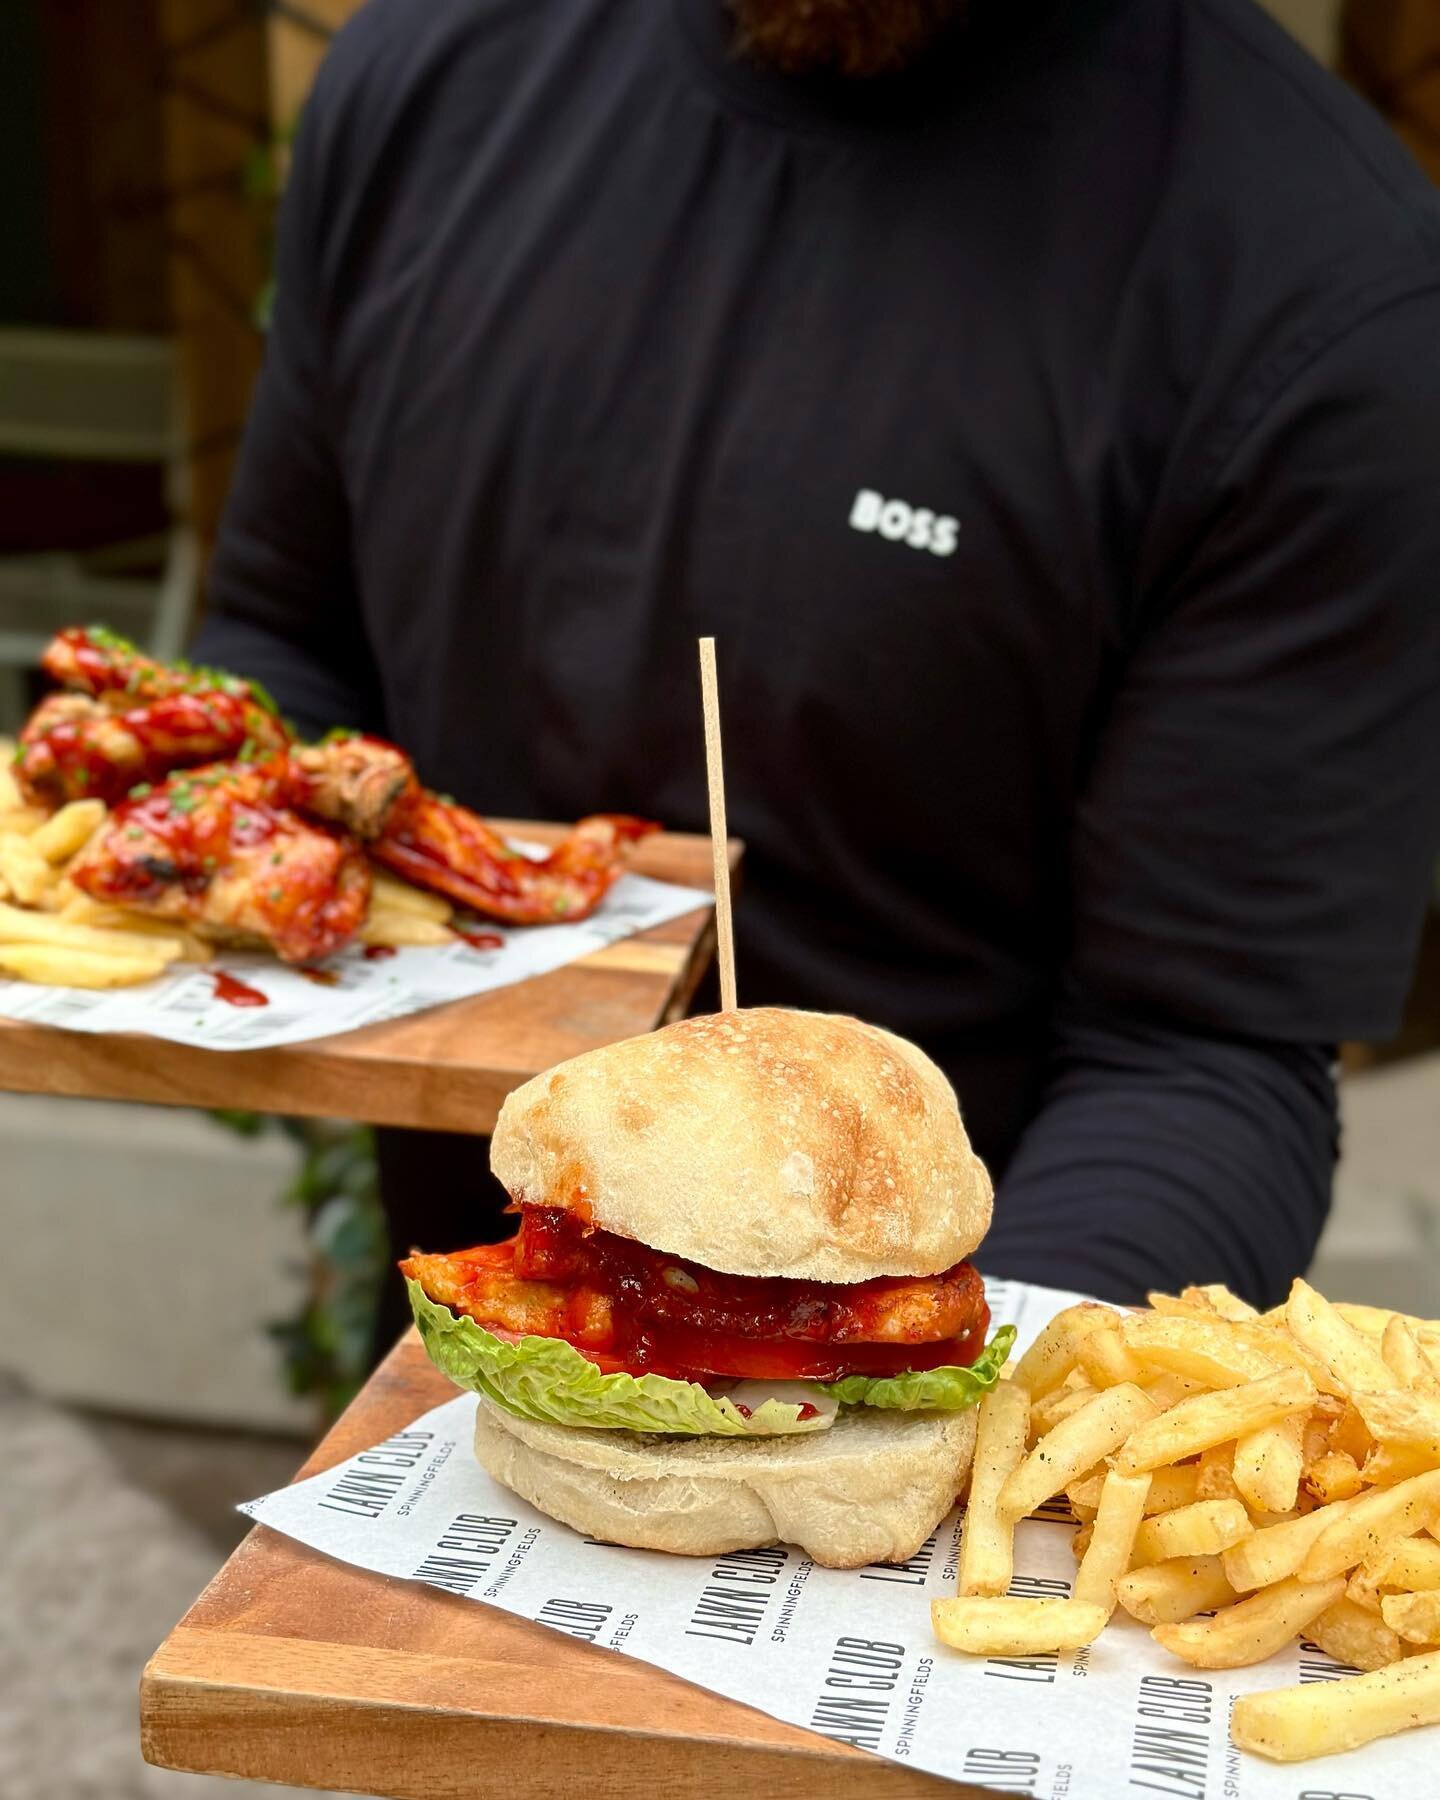 &pound;10 for a delicious lunch? Yes, please! 

Choose any main from our lunch menu and pair it with a refreshing soft drink. 

Pictured here: our mouth-watering Sriracha halloumi ciabatta sandwich. 🤤🧡

🍴 Available Tuesday-Friday 12-5 pm

.

.

.
